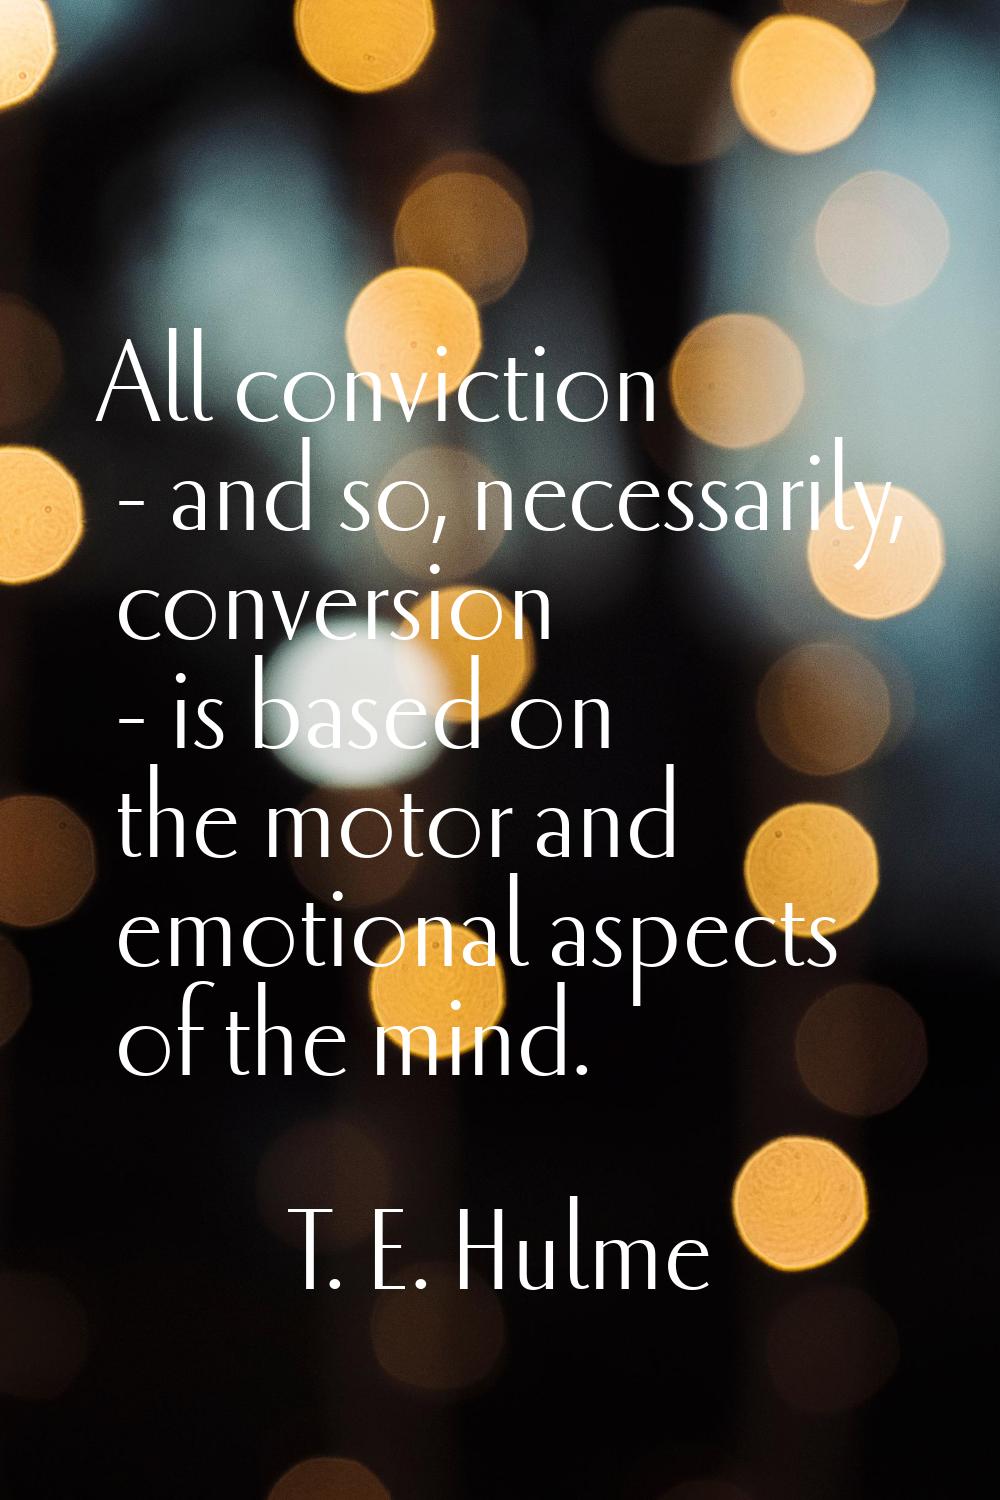 All conviction - and so, necessarily, conversion - is based on the motor and emotional aspects of t